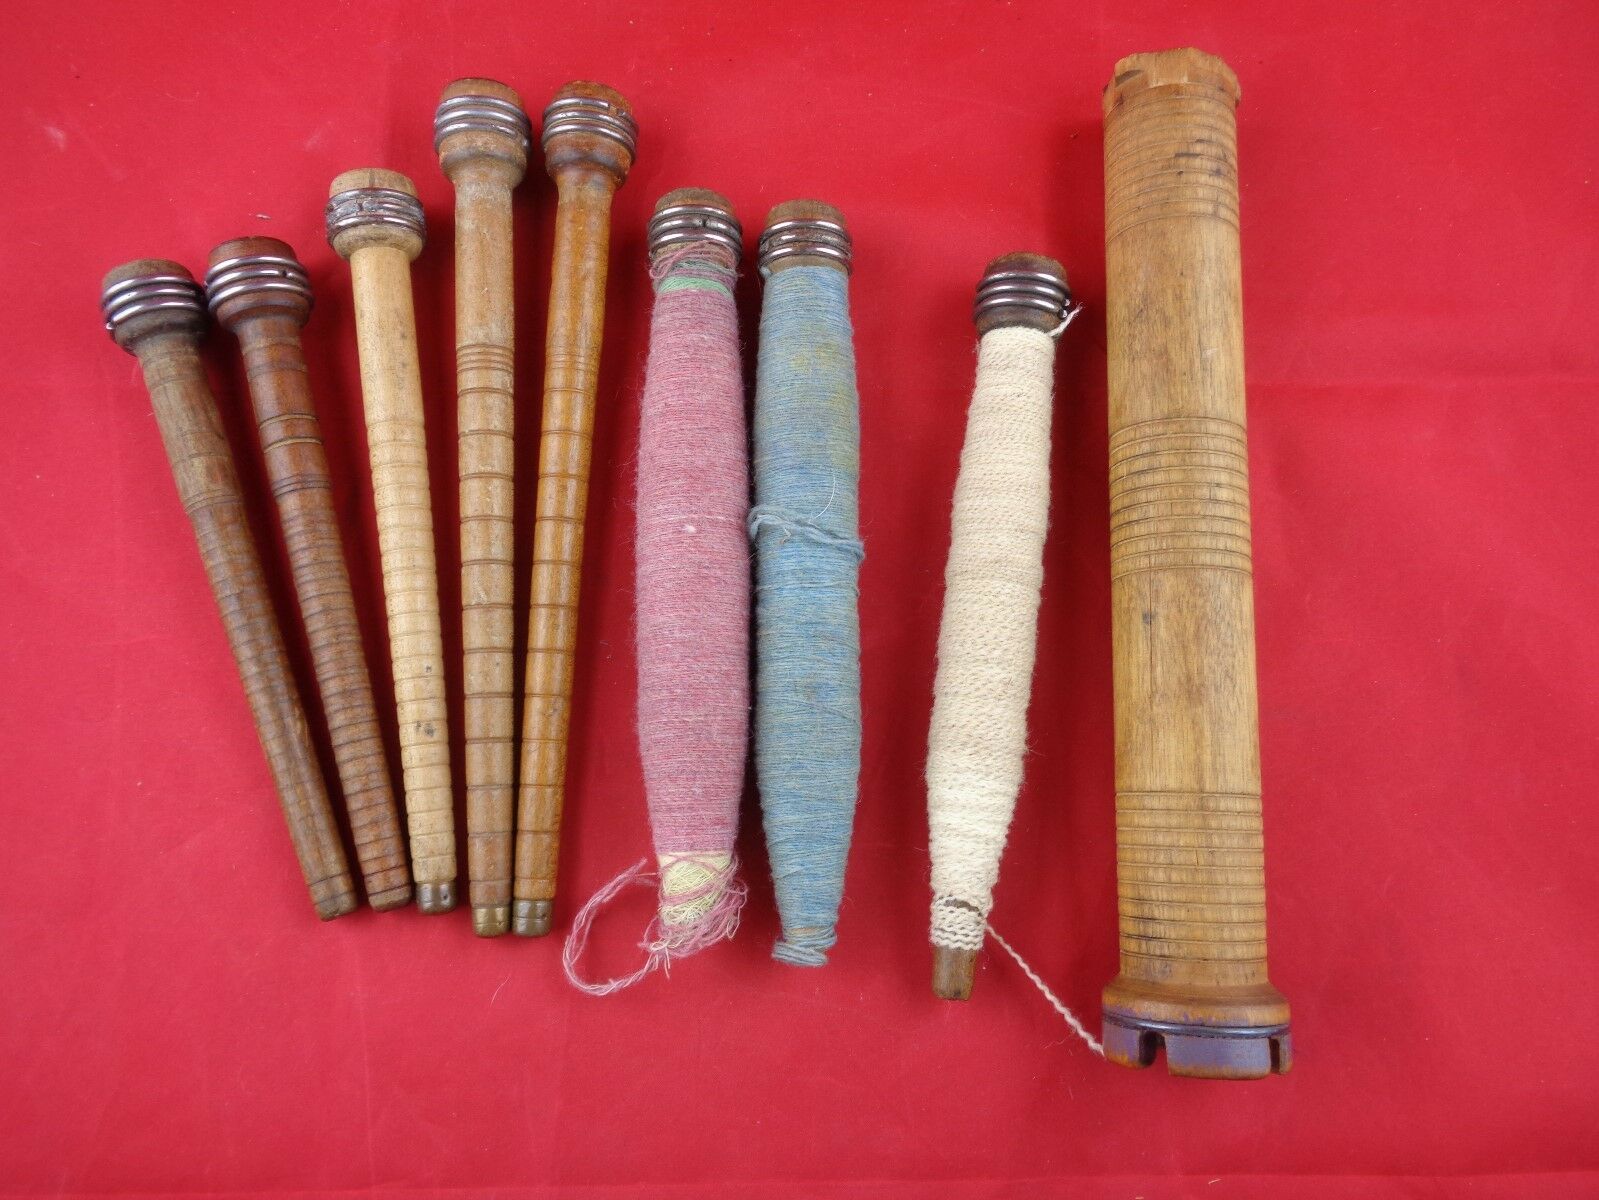 Vintage Wood Textile Sewing Bobbins Spindles Spools With Thread Yarn Lot Of 9